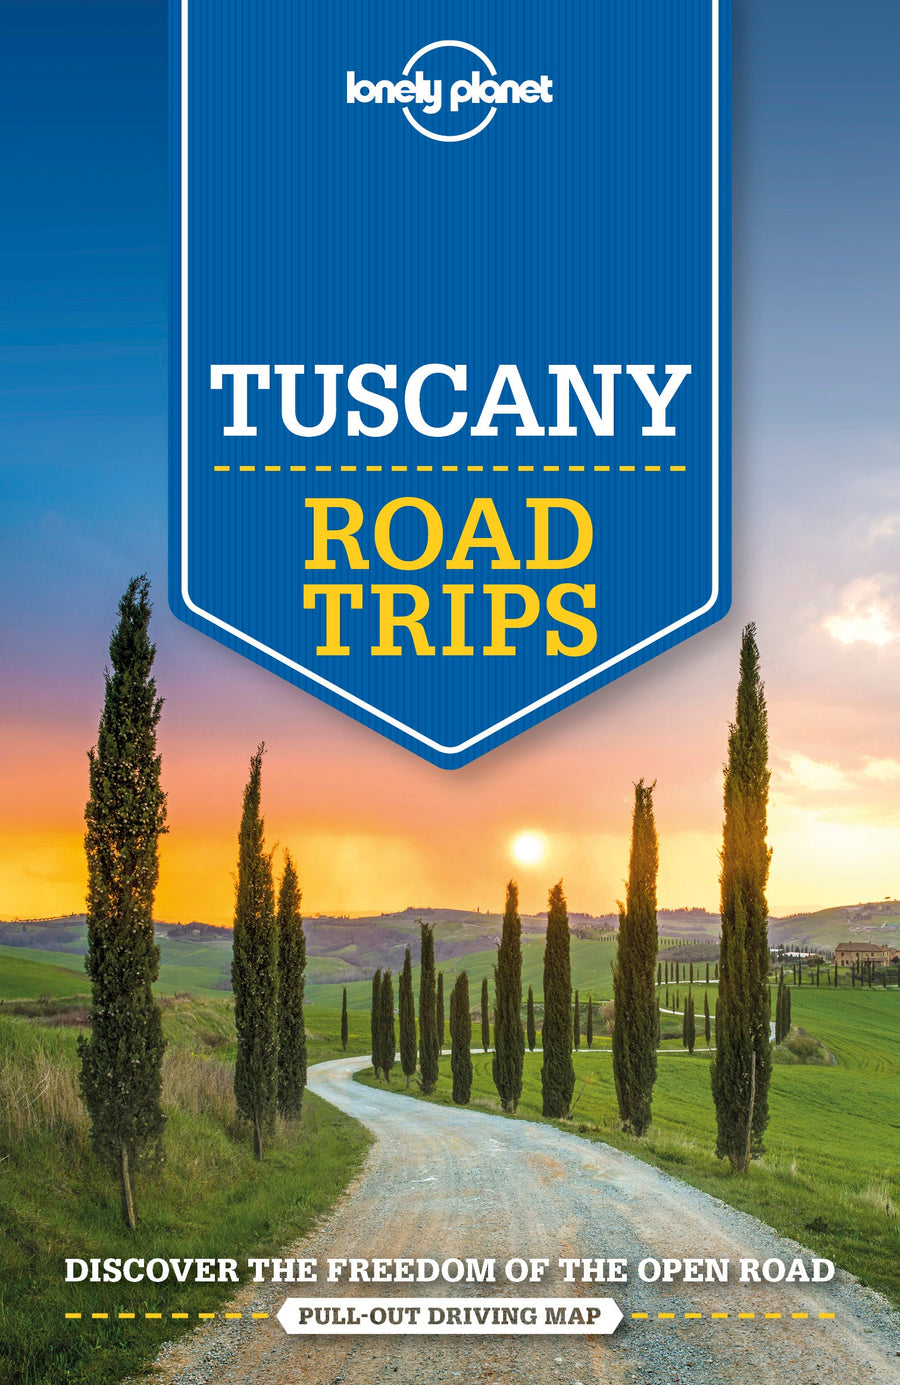 Road trip (en anglais) - Tuscany | Lonely Planet guide de voyage Lonely Planet 